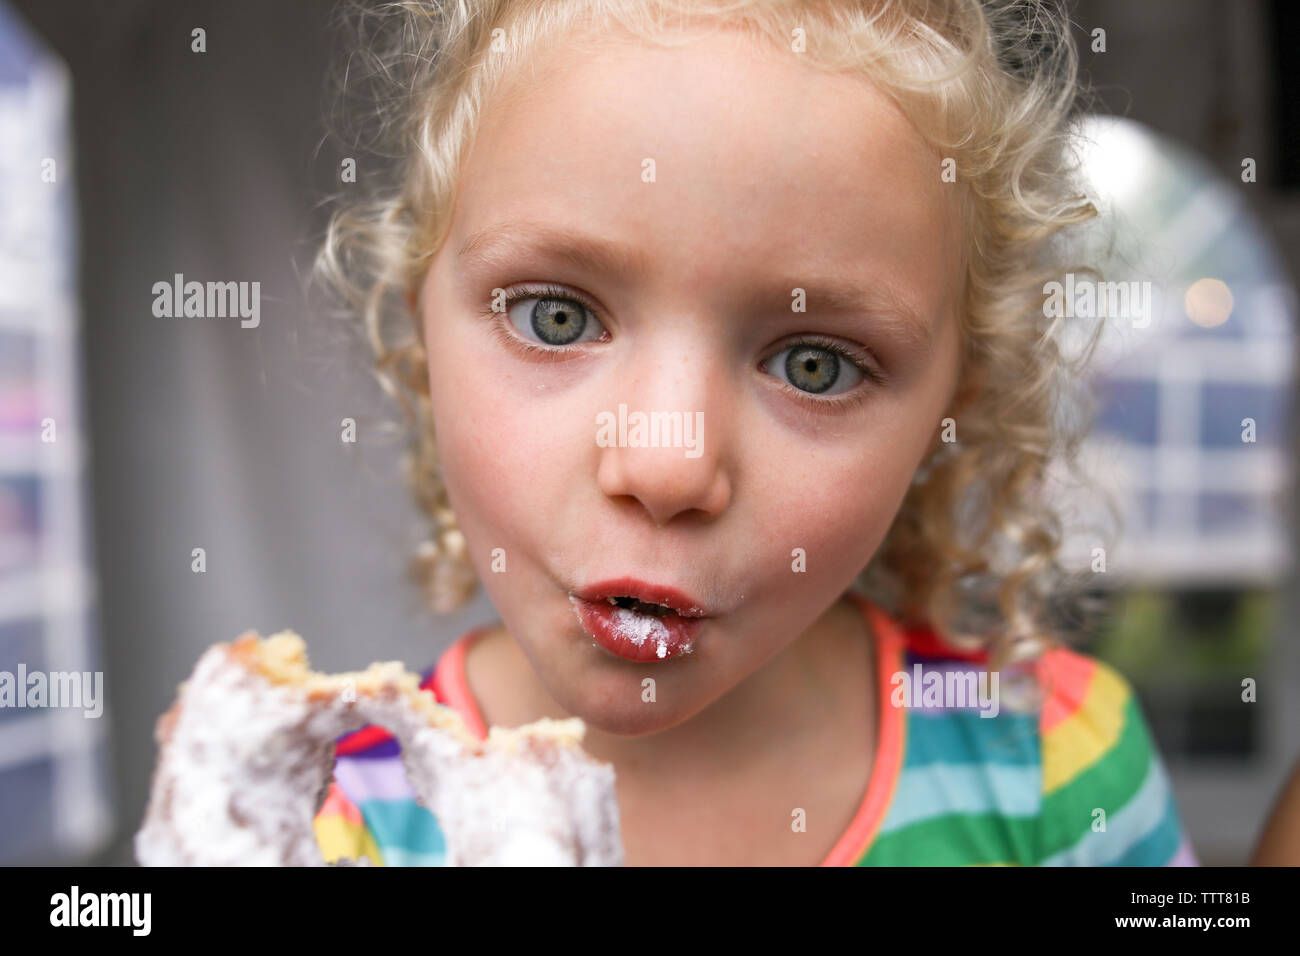 Portrait of cute girl making face while eating donut Stock Photo